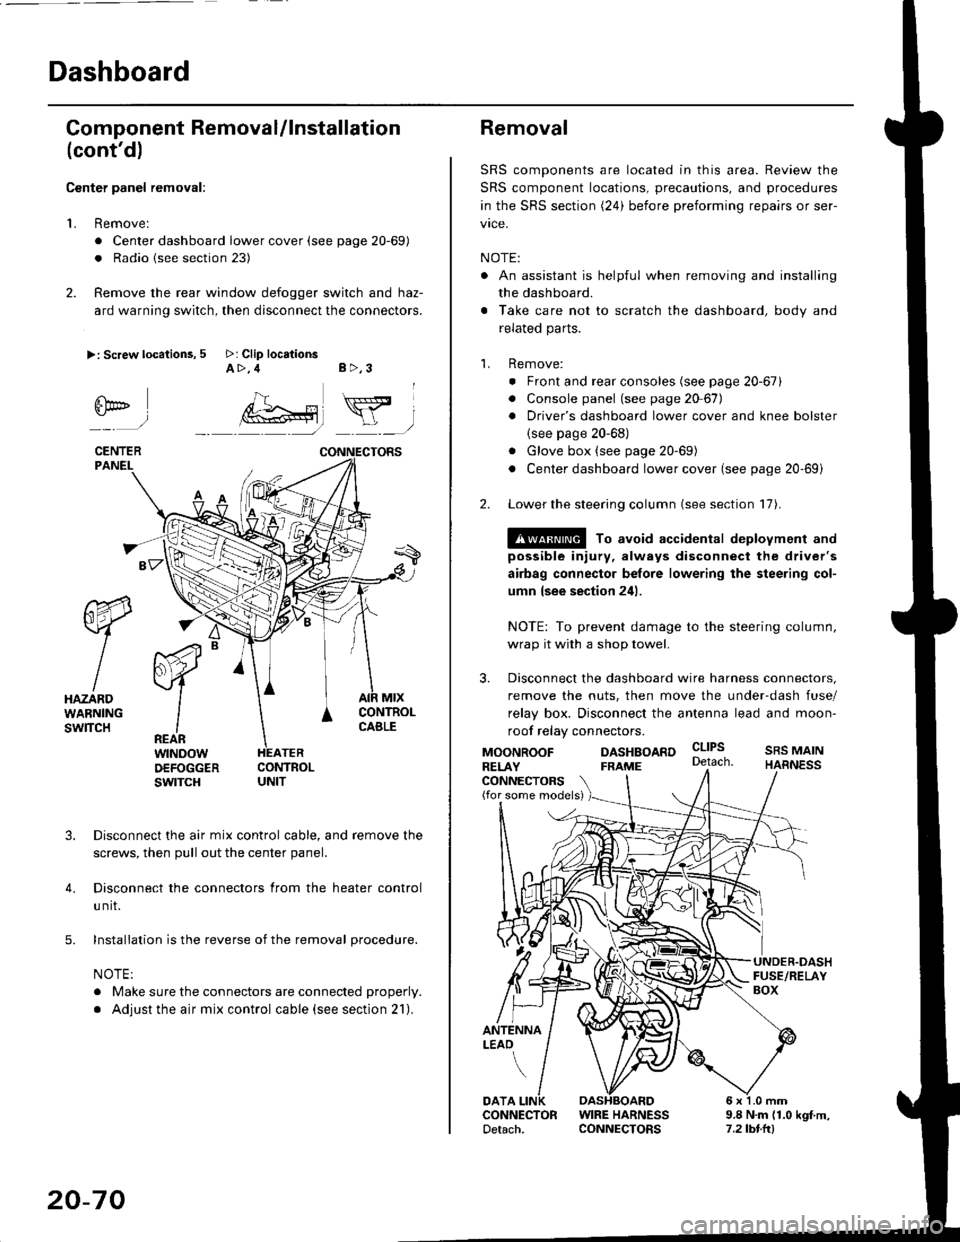 HONDA CIVIC 1997 6.G Workshop Manual Dashboard
Gomponent Removal/lnstallation
(contd)
Center panel removal:
1. Remove:
. Center dashboard lower cover (see page 20-69)
. Radio {see section 23)
2. Remove the rear window defogger switch an